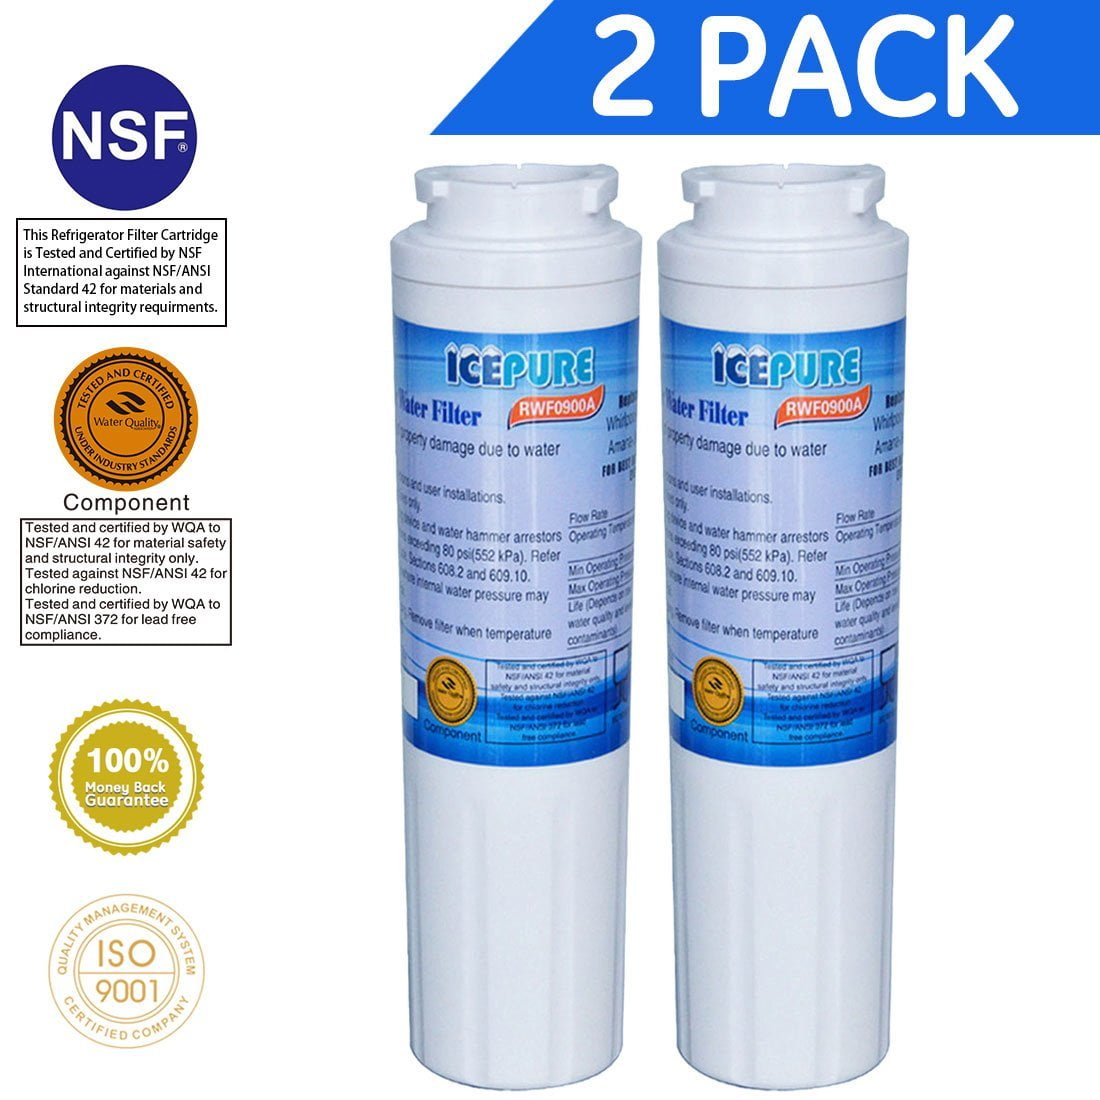 UKF8001AXX, Compatible with Maytag UKF8001 2 pack Refrigerator Water Filter 